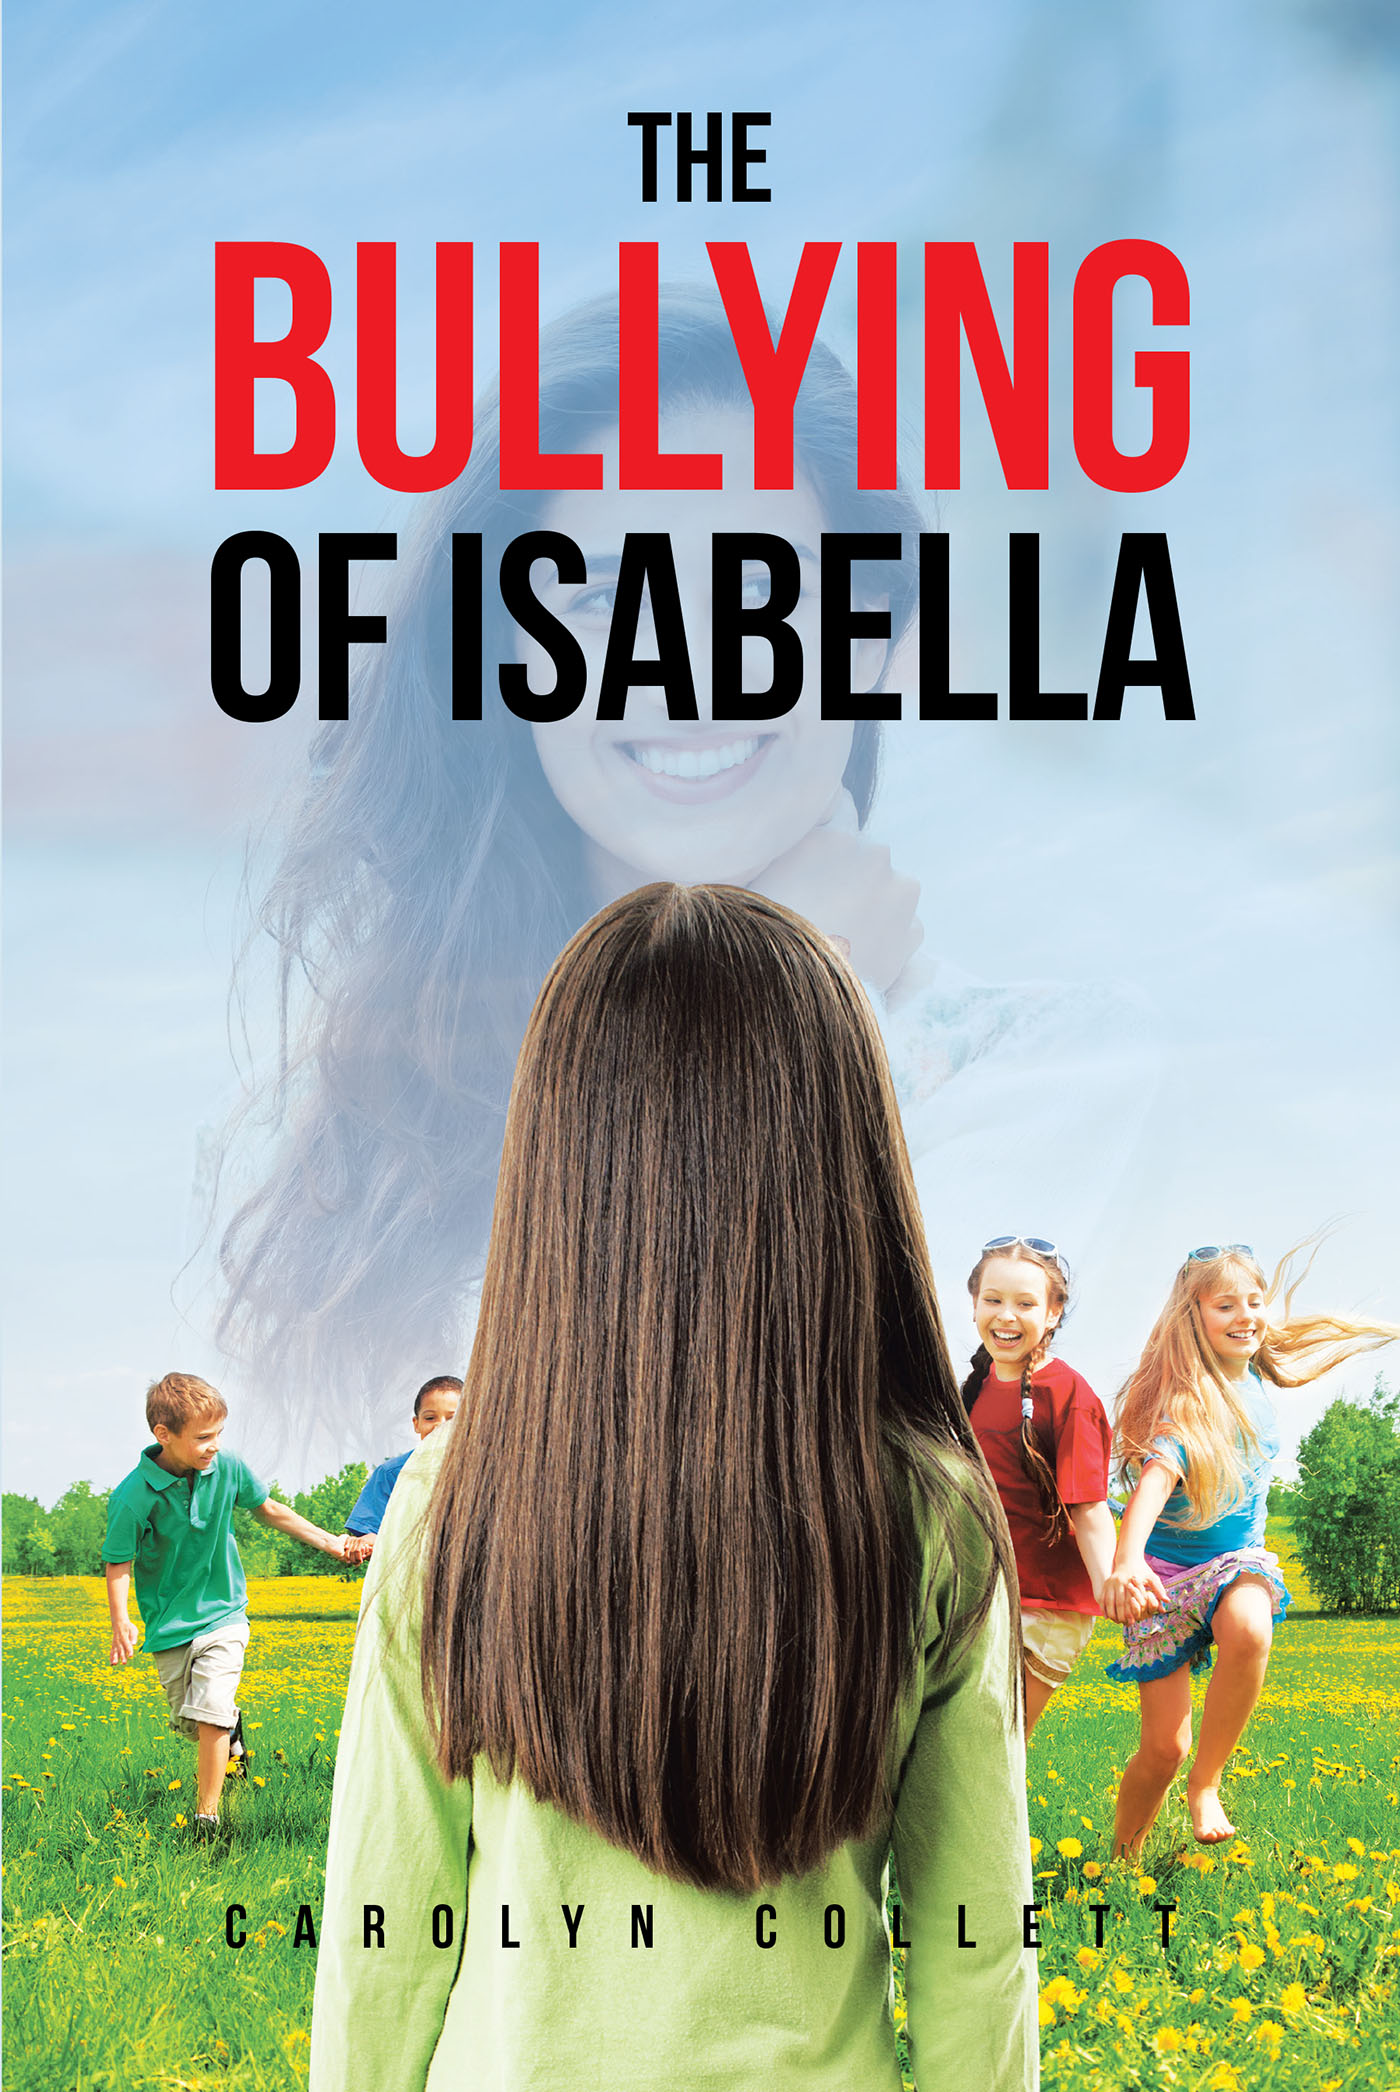 Author Carolyn Collett’s New Book, "The Bullying of Isabella," Follows a Young Girl Who Looks to God and Her Good Heart to Overcome the Bullying She Faced in School